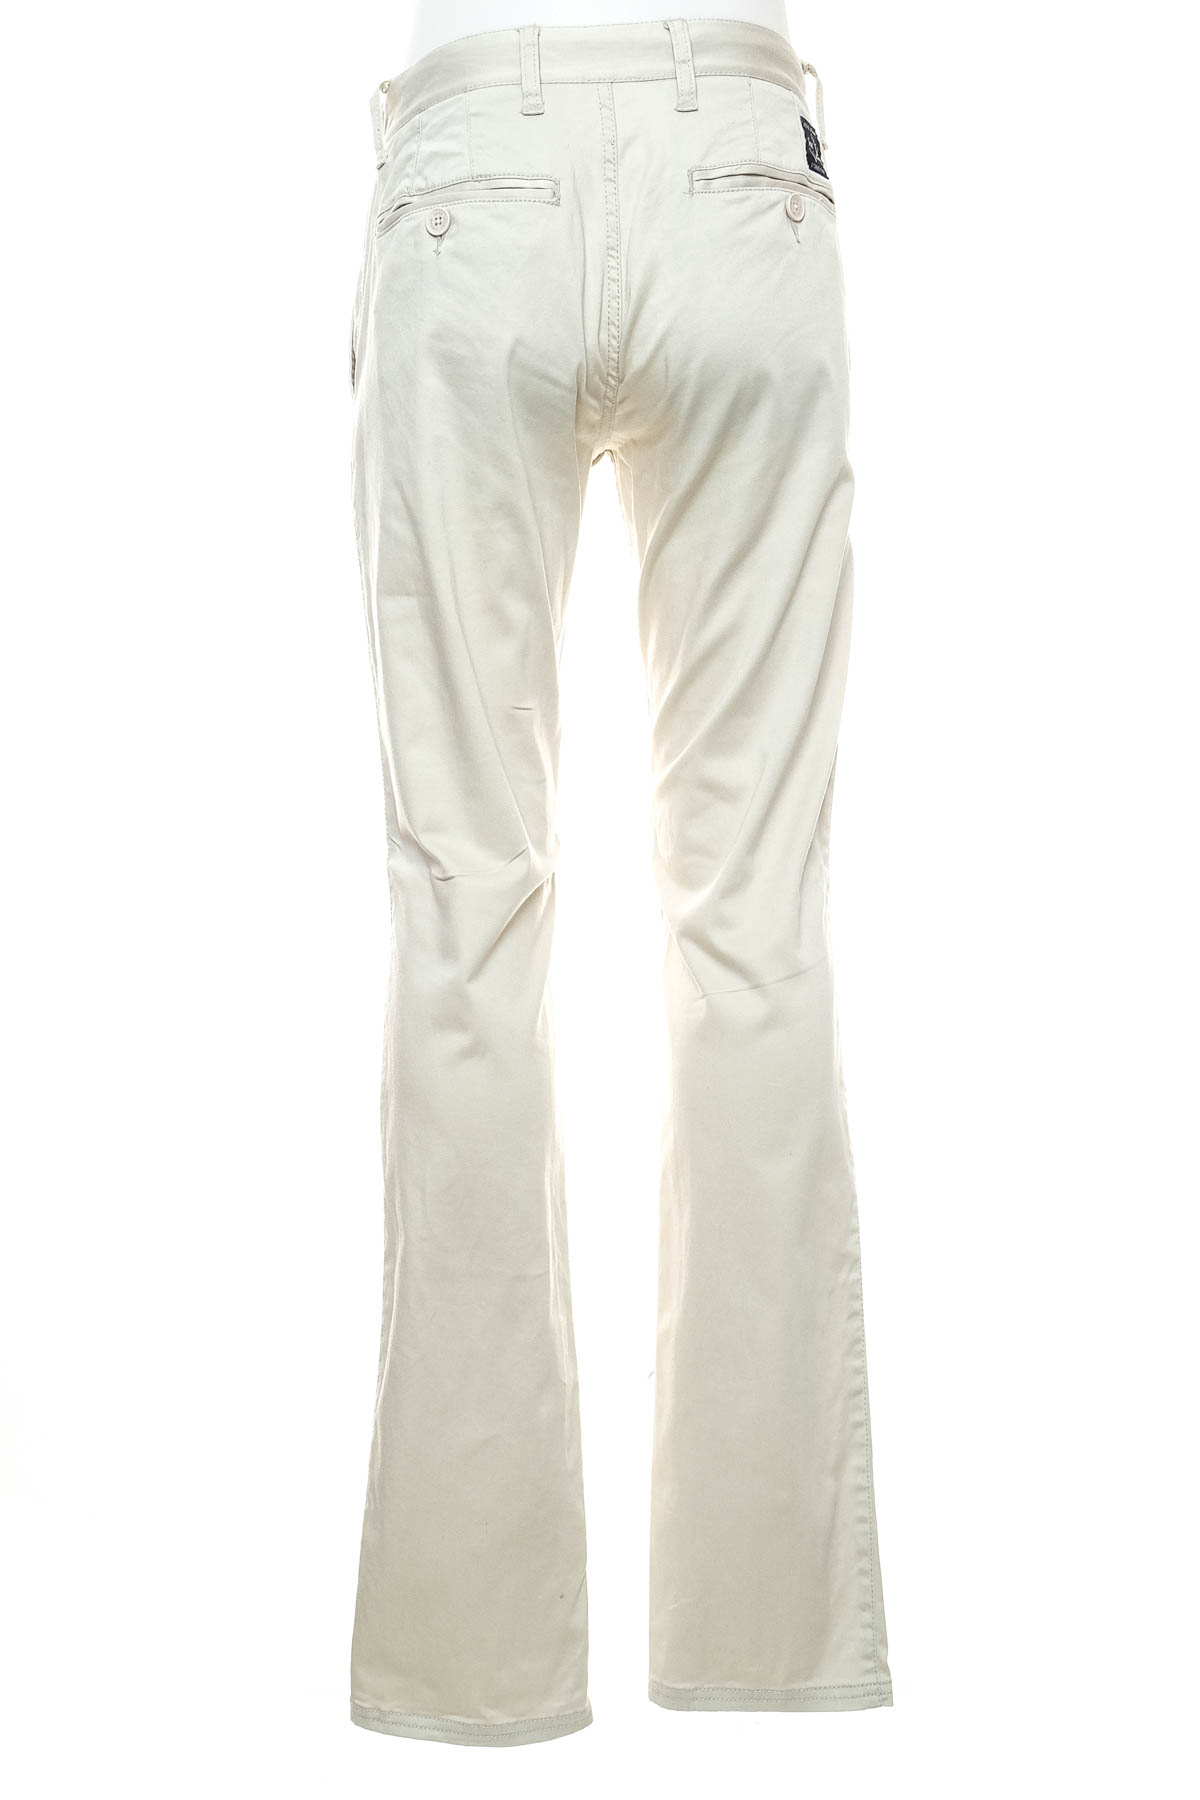 Men's trousers - Pepe Jeans - 1